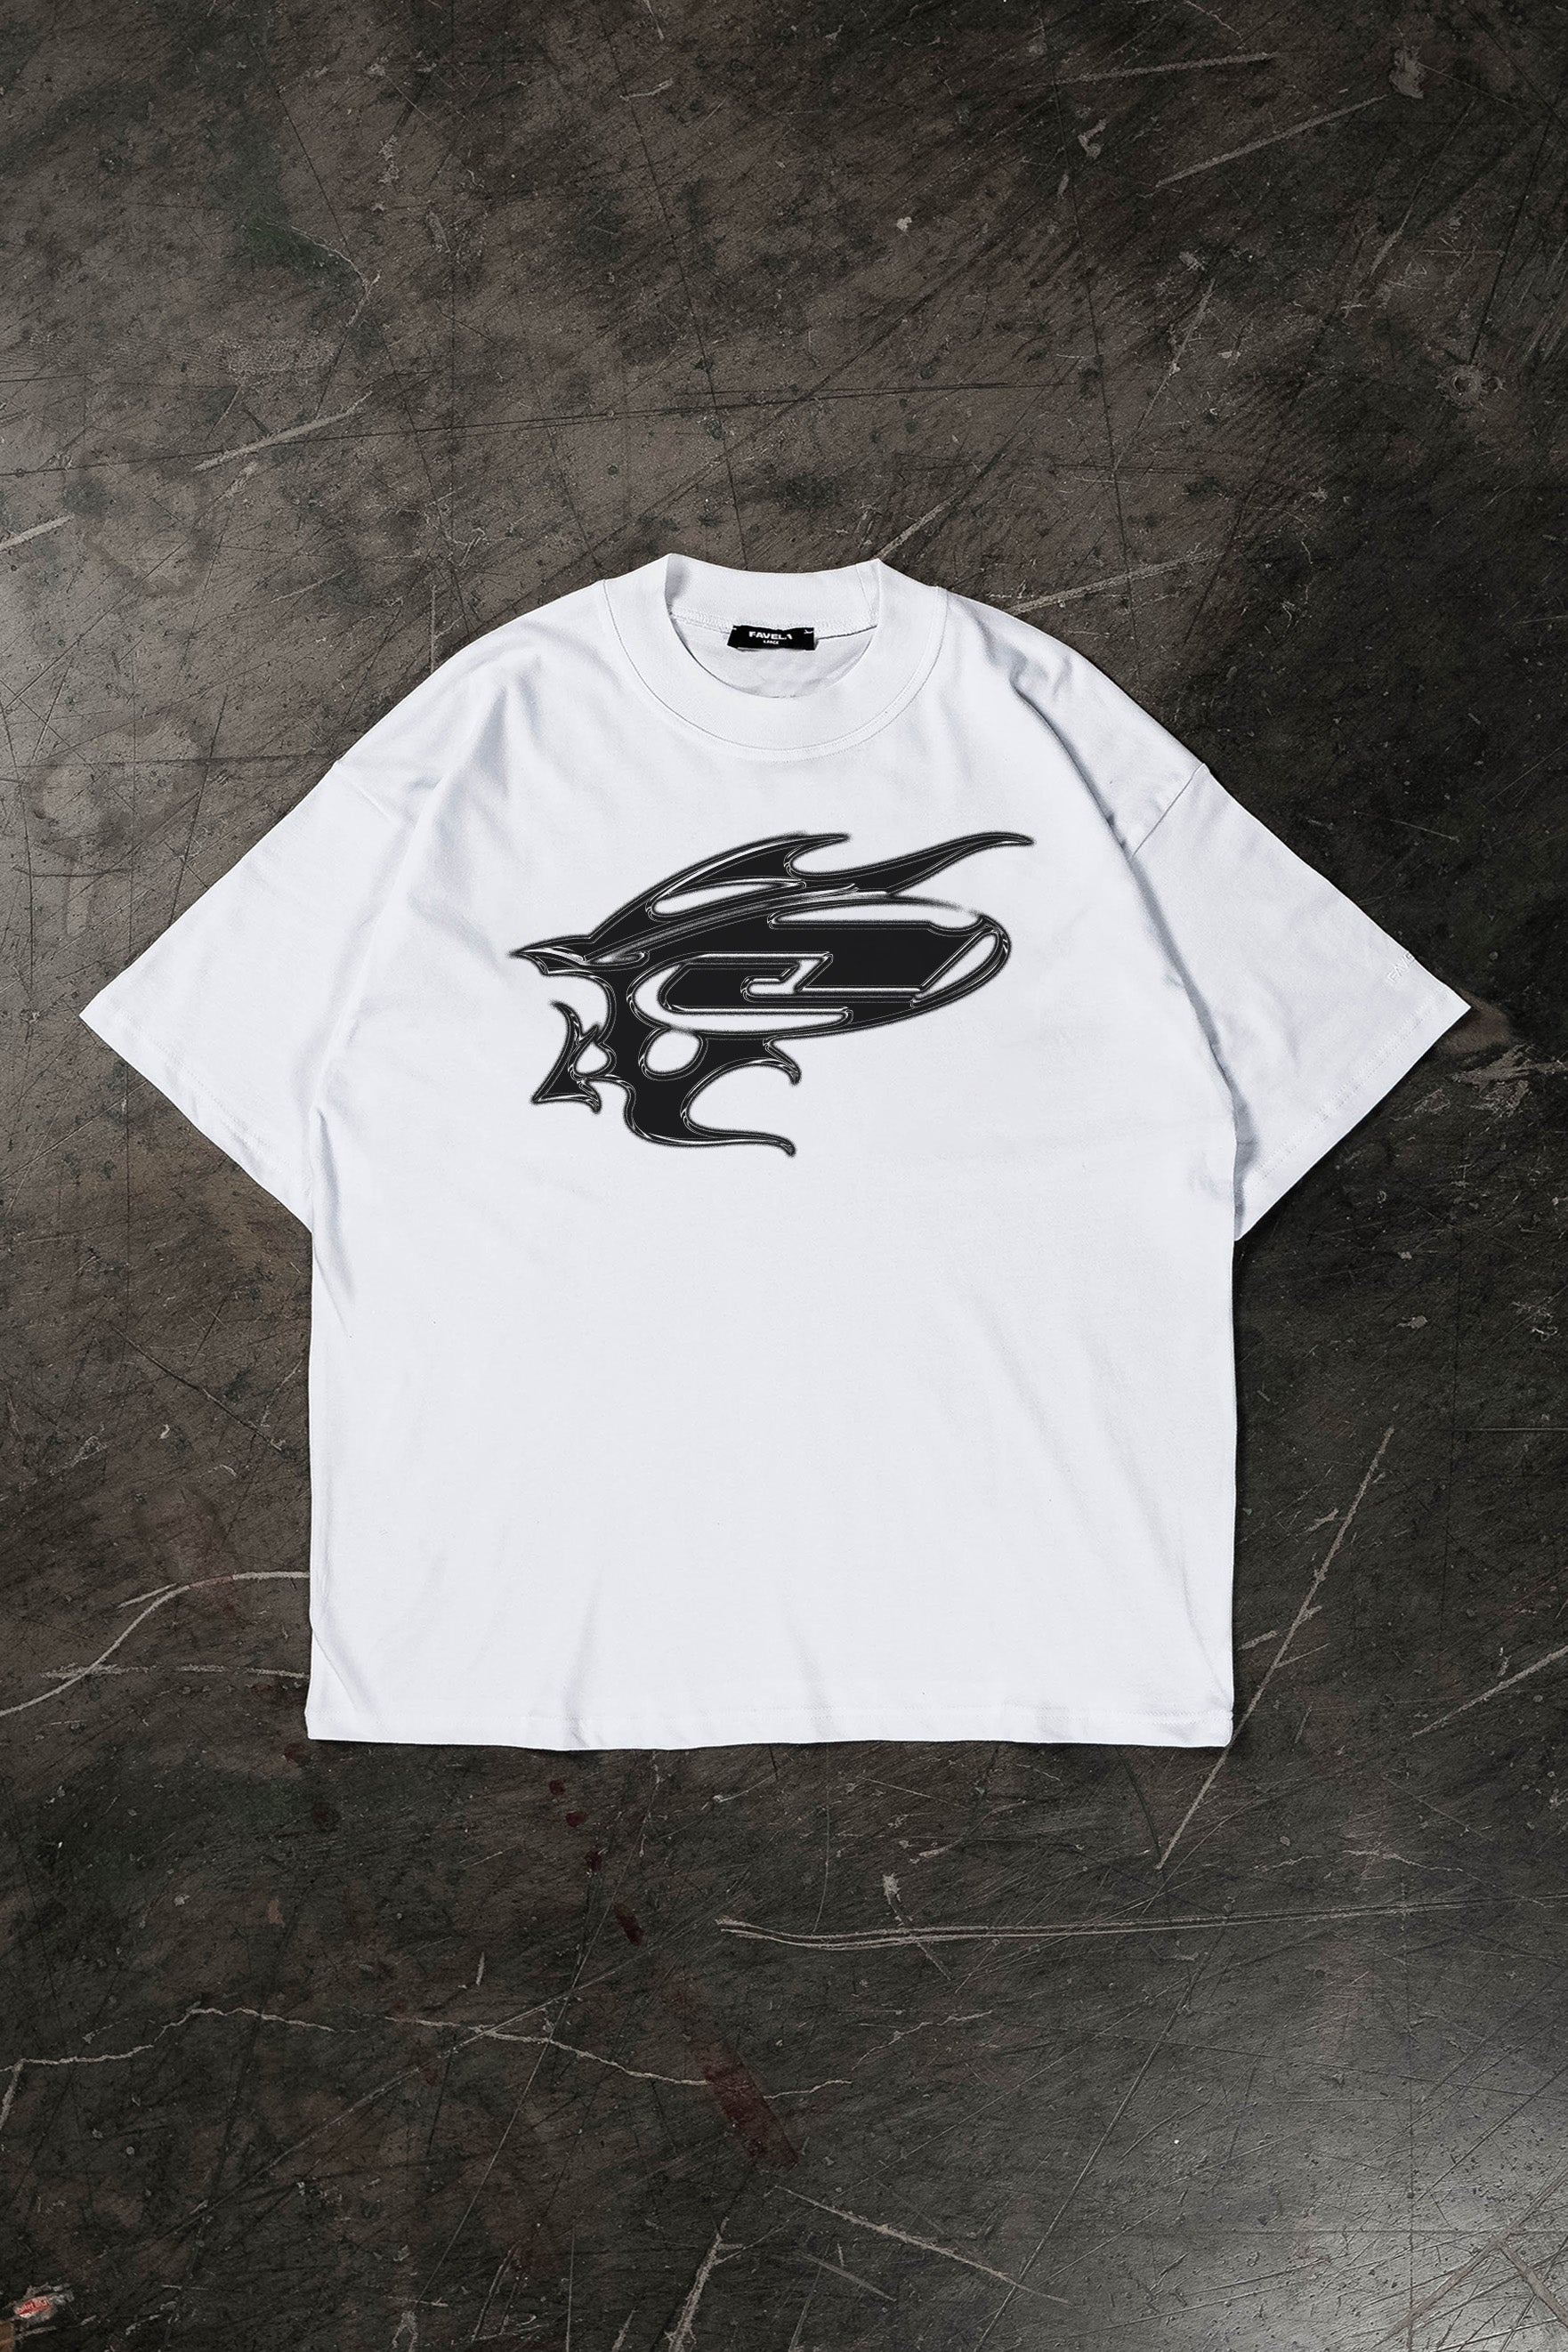 T-Shirt in white with black print